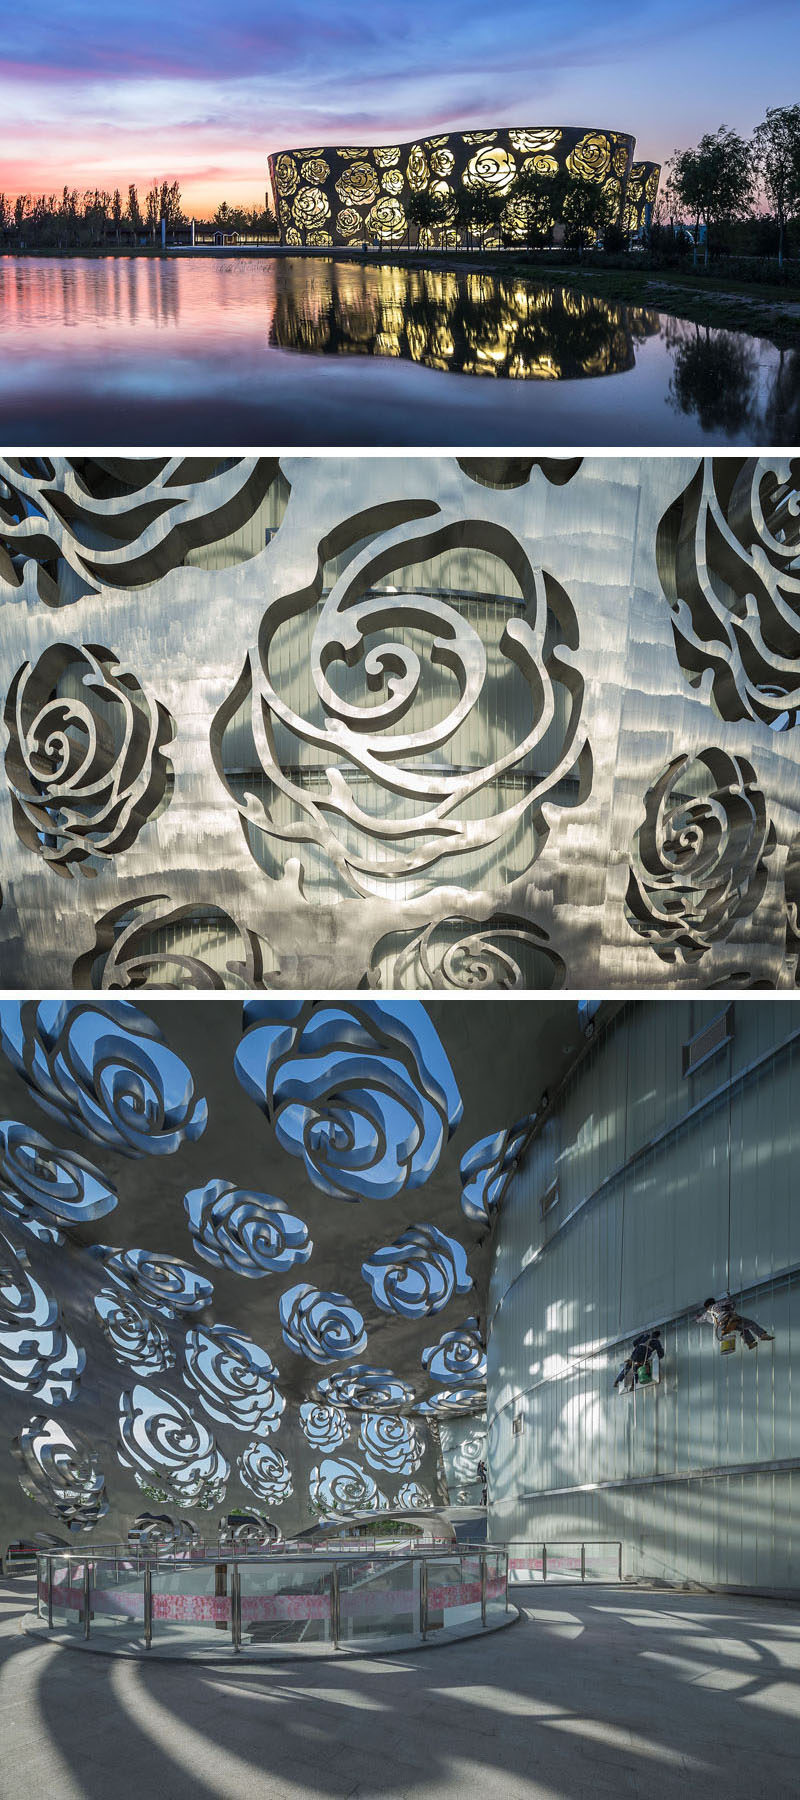 Exterior Design Ideas - 15 Buildings That Have Unique And Creative Facades // This rose museum is covered by a stainless steel facade with roses cut into it.